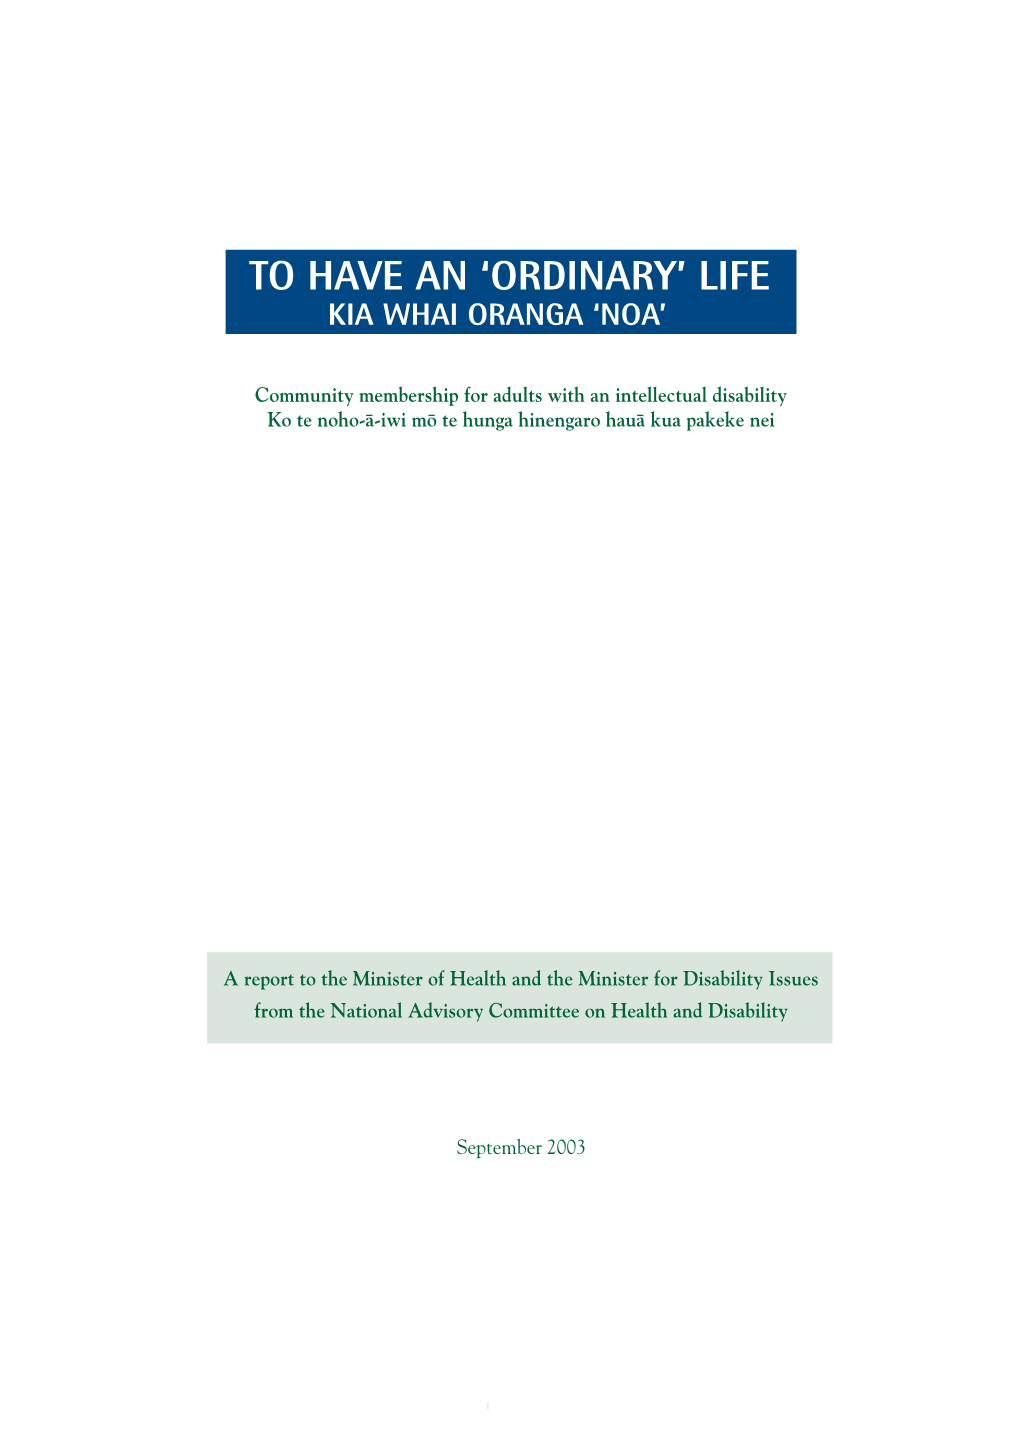 To Have an 'Ordinary' Life